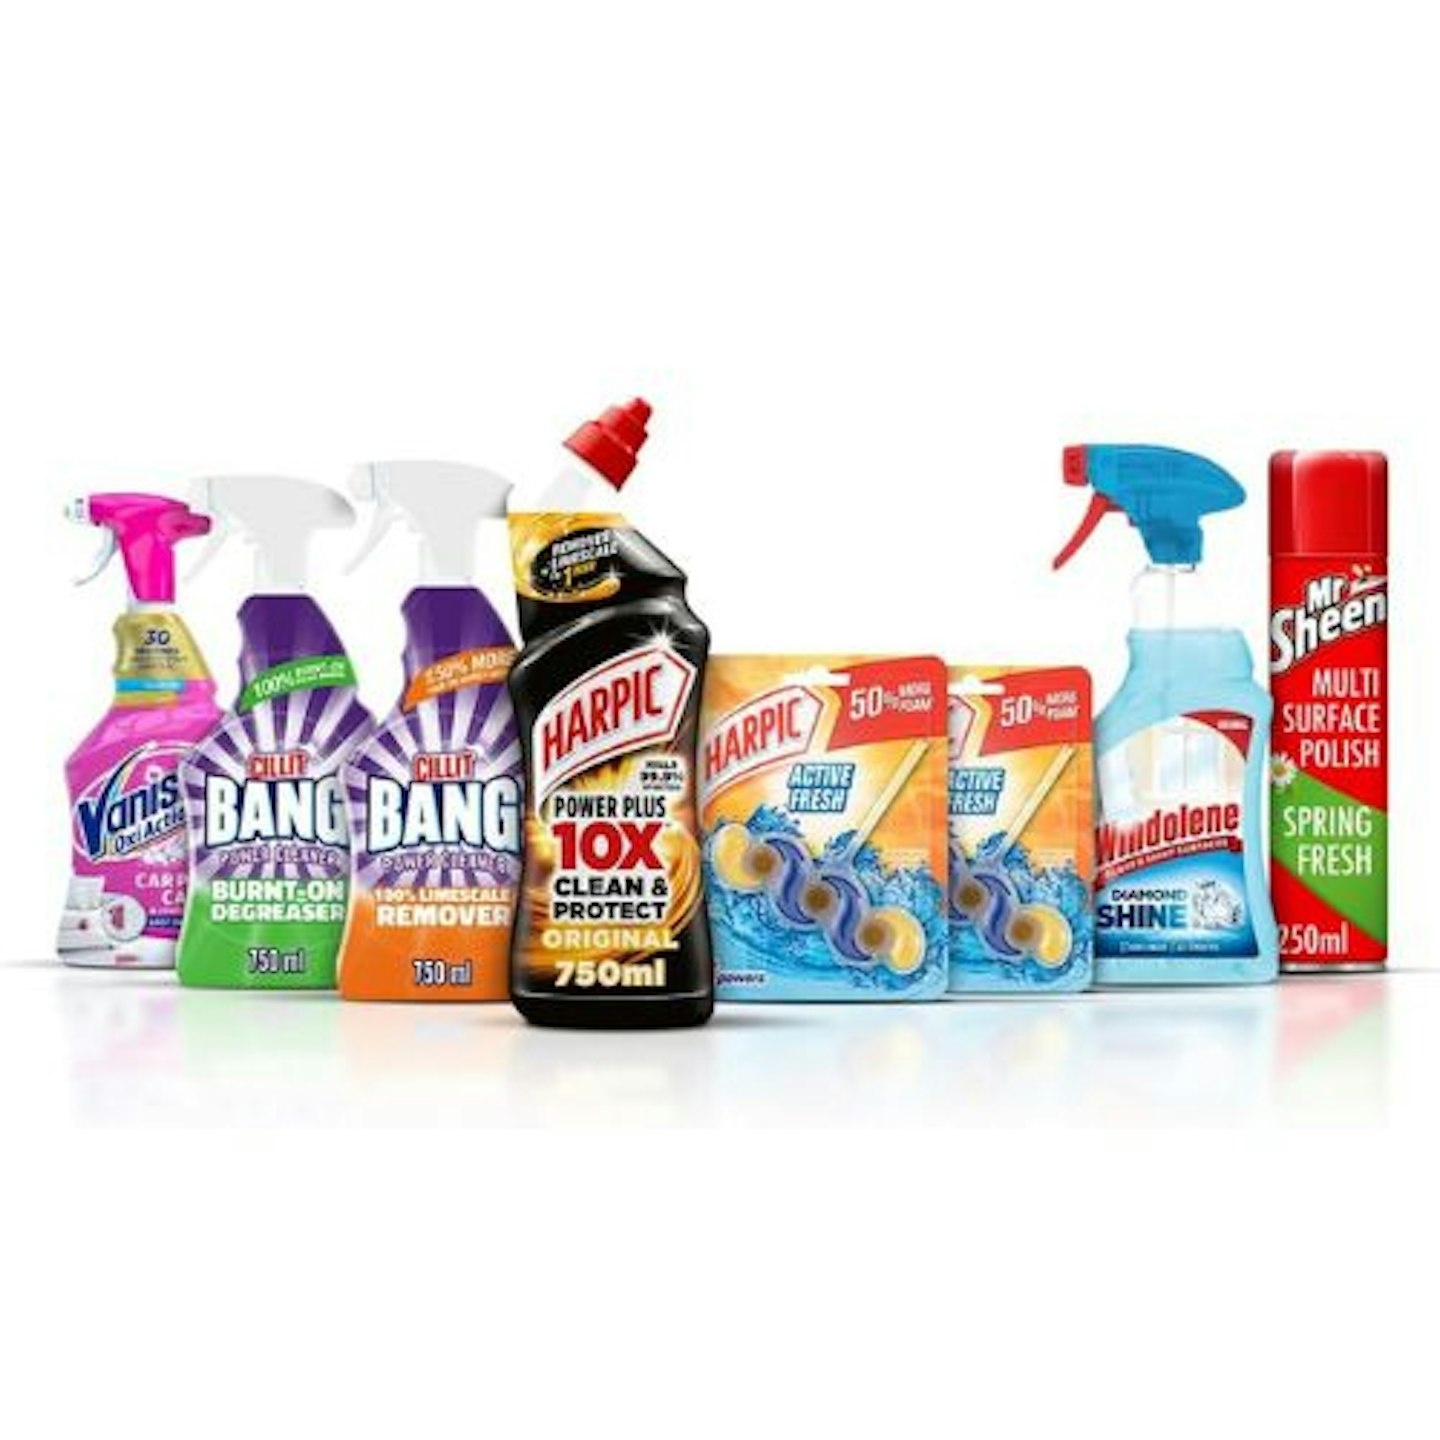 Harpic Ultimate Home essentials Spring Cleaning Products Bundle